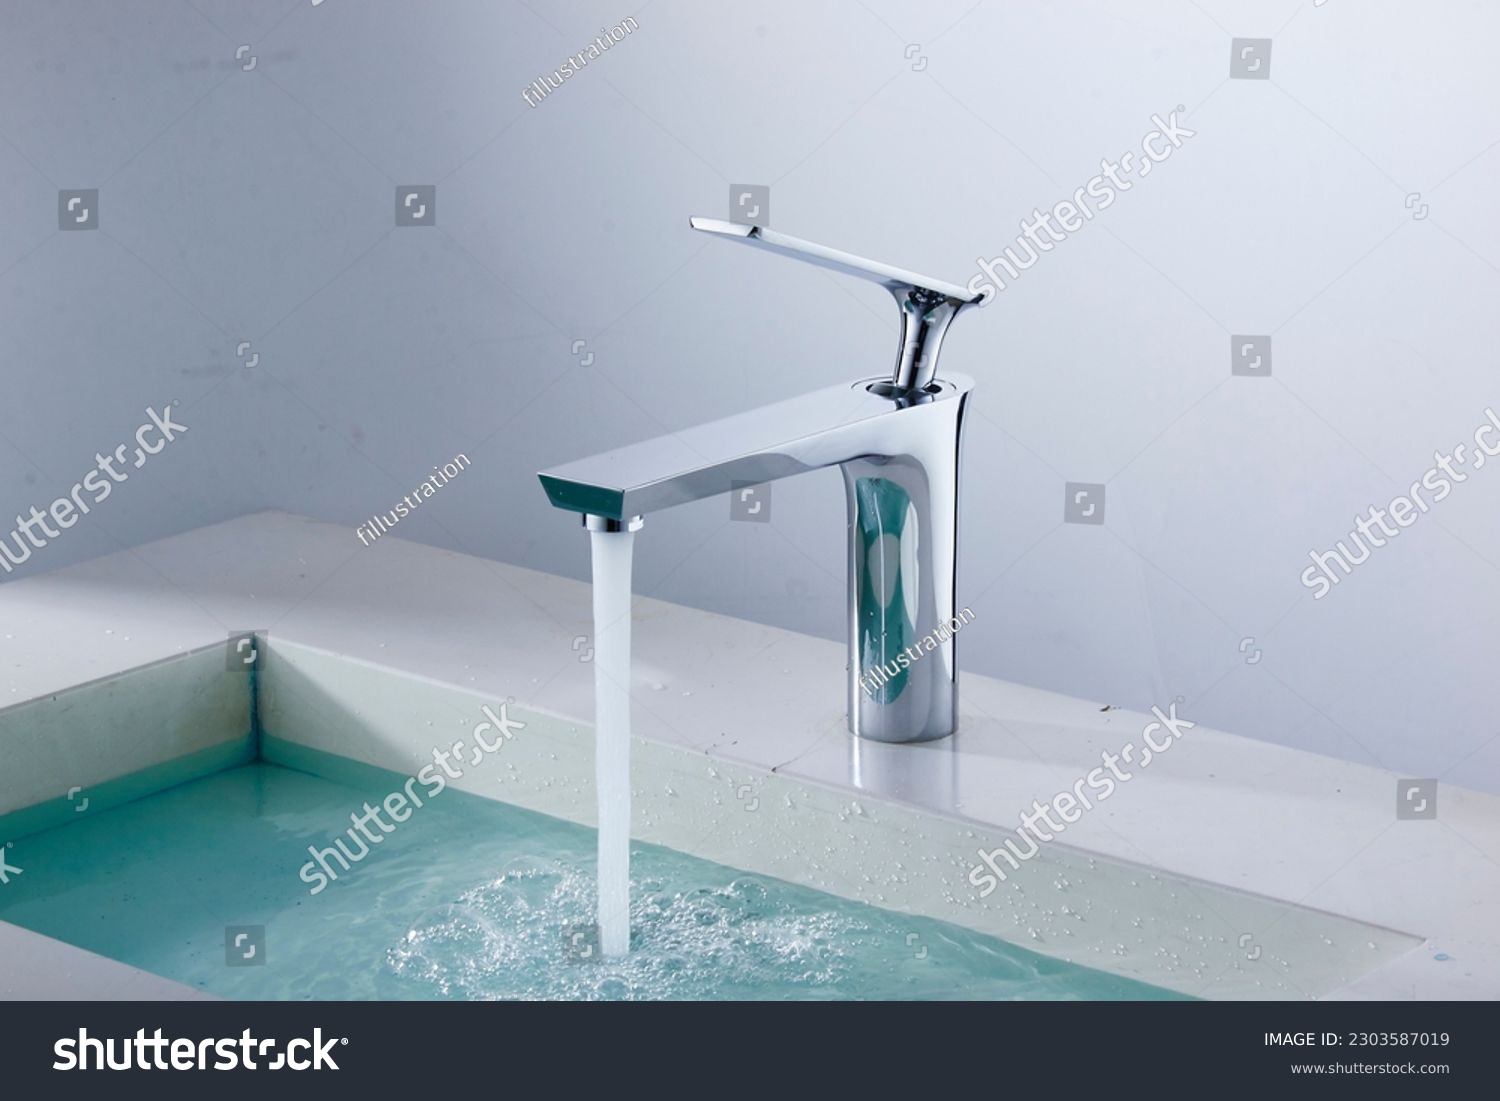 Modern Domestic Bathroom with Faucets. A domestic bathroom featuring a sink, faucet, and bathtub surrounded by household equipment. Water Tap. #2303587019